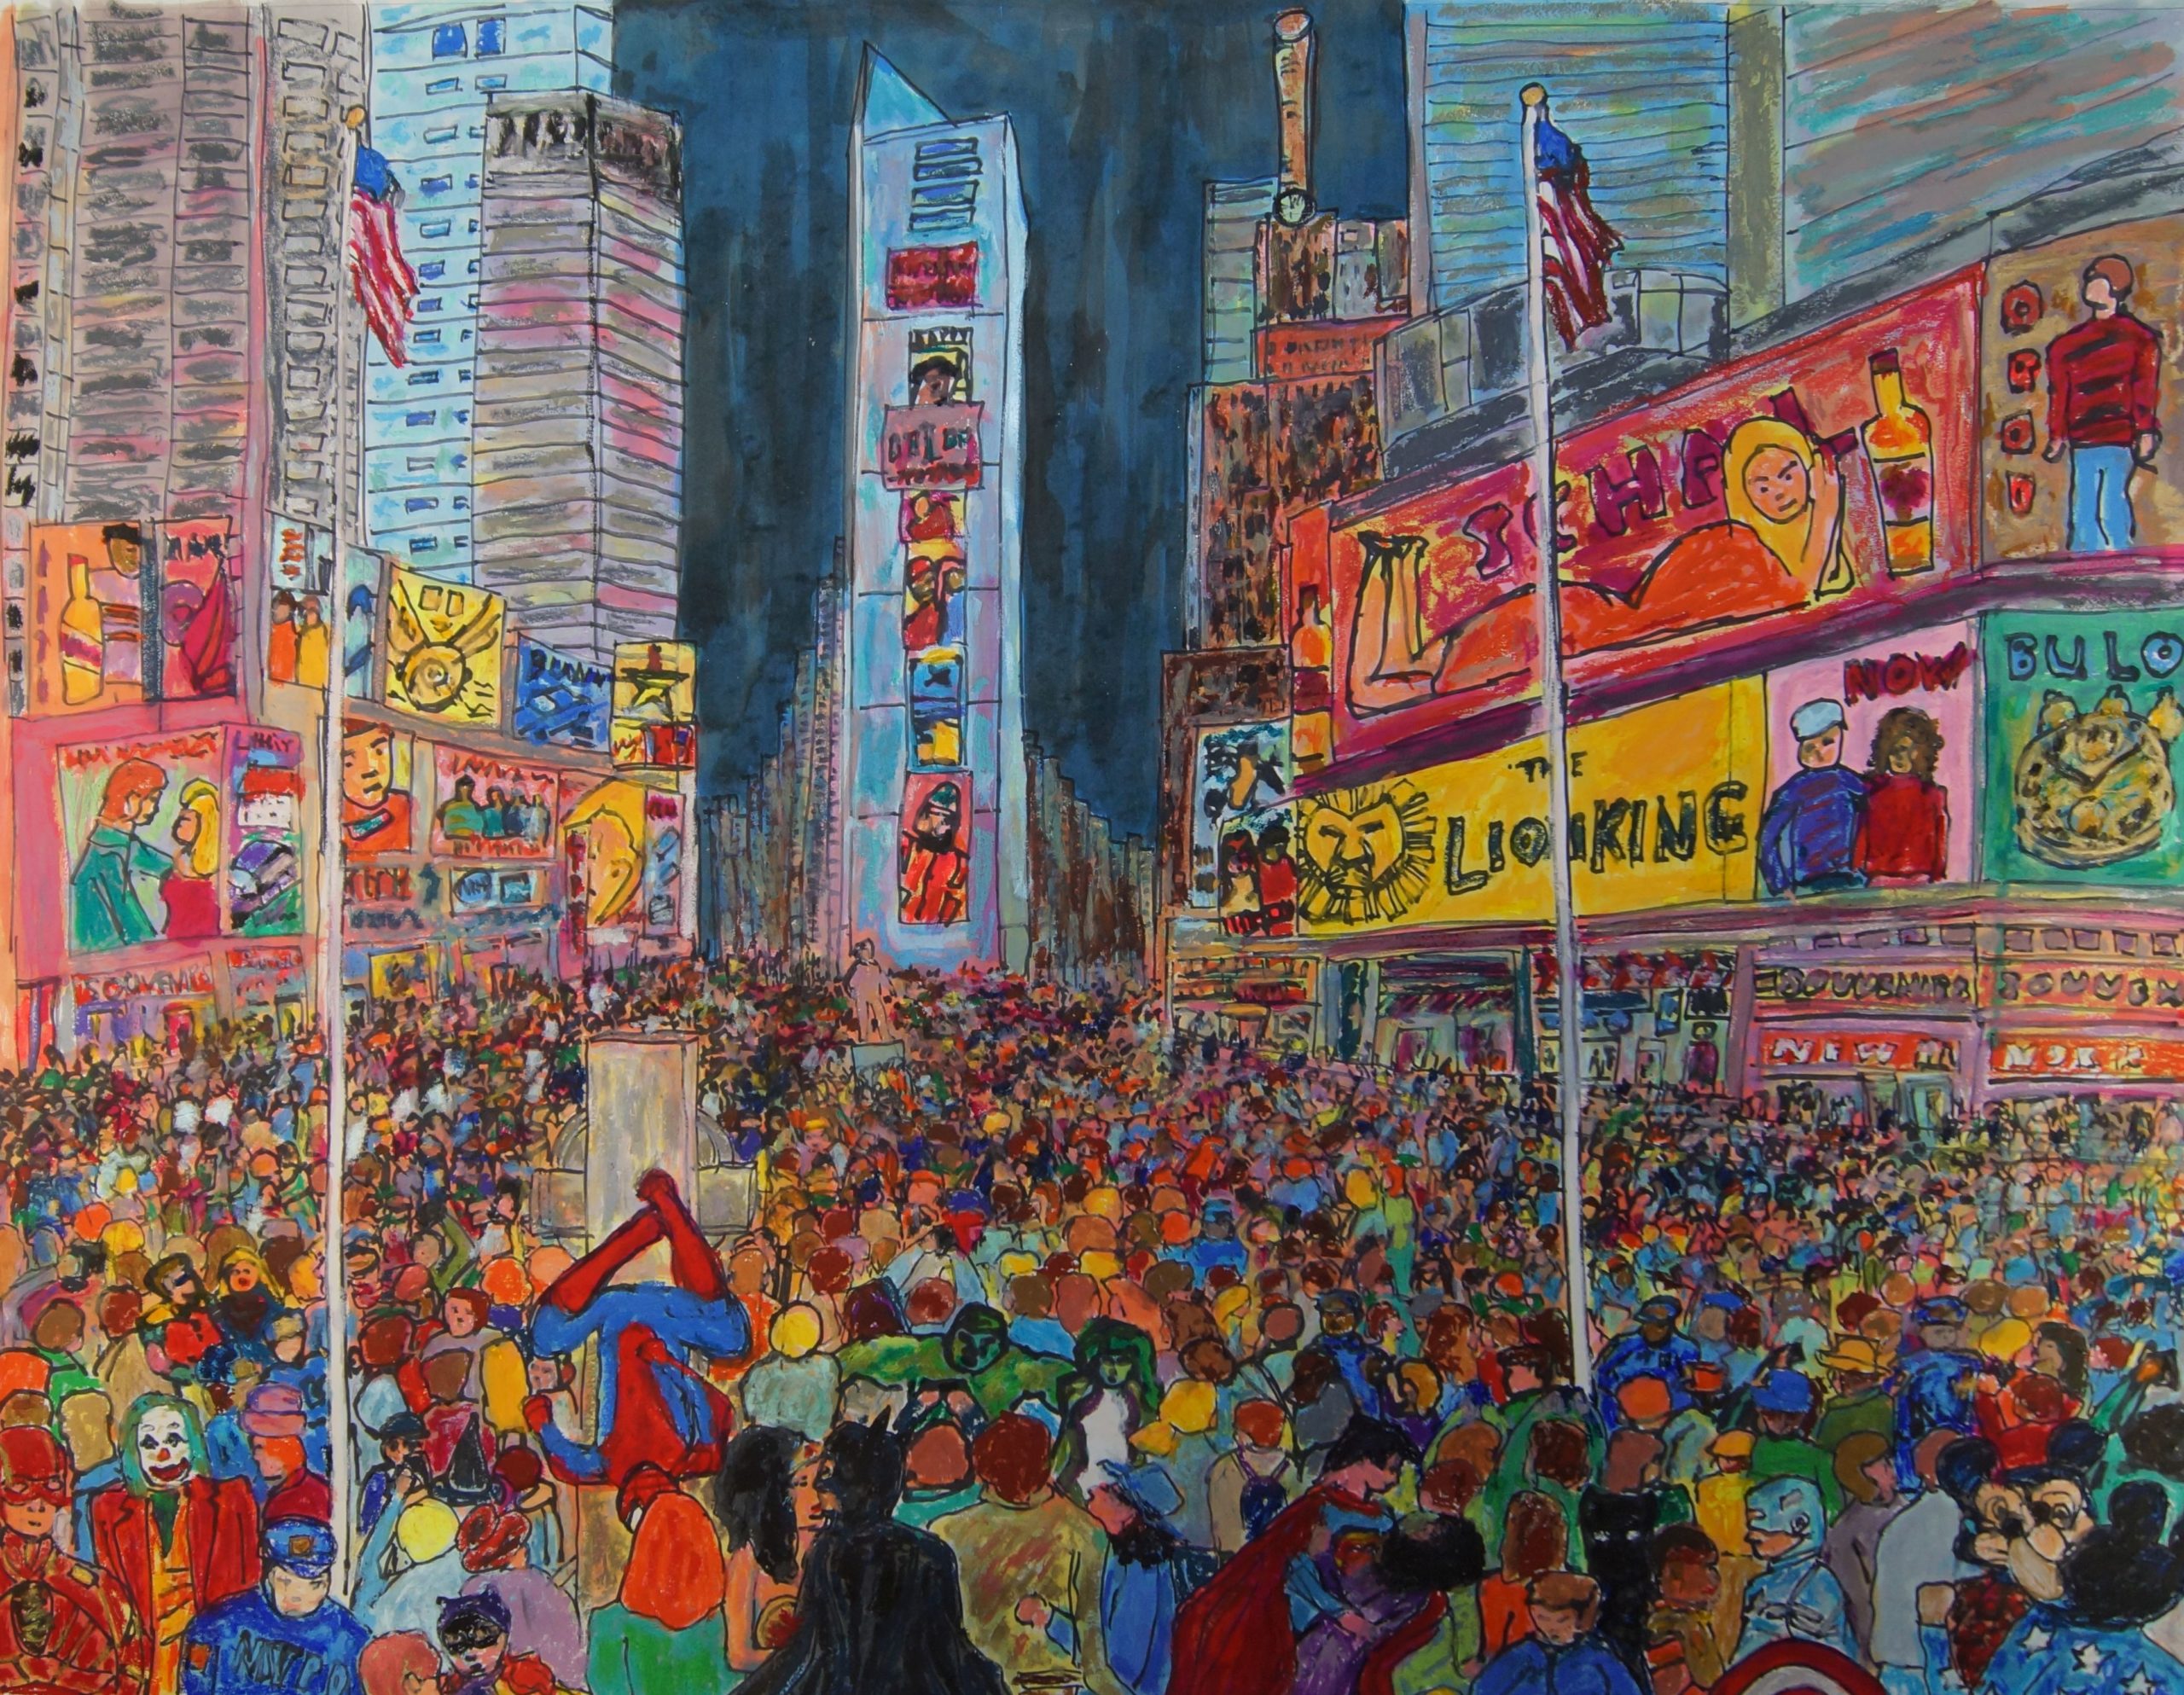 Super-heroes celebrating New Year’s Eve in a city that looks a lot like New York.